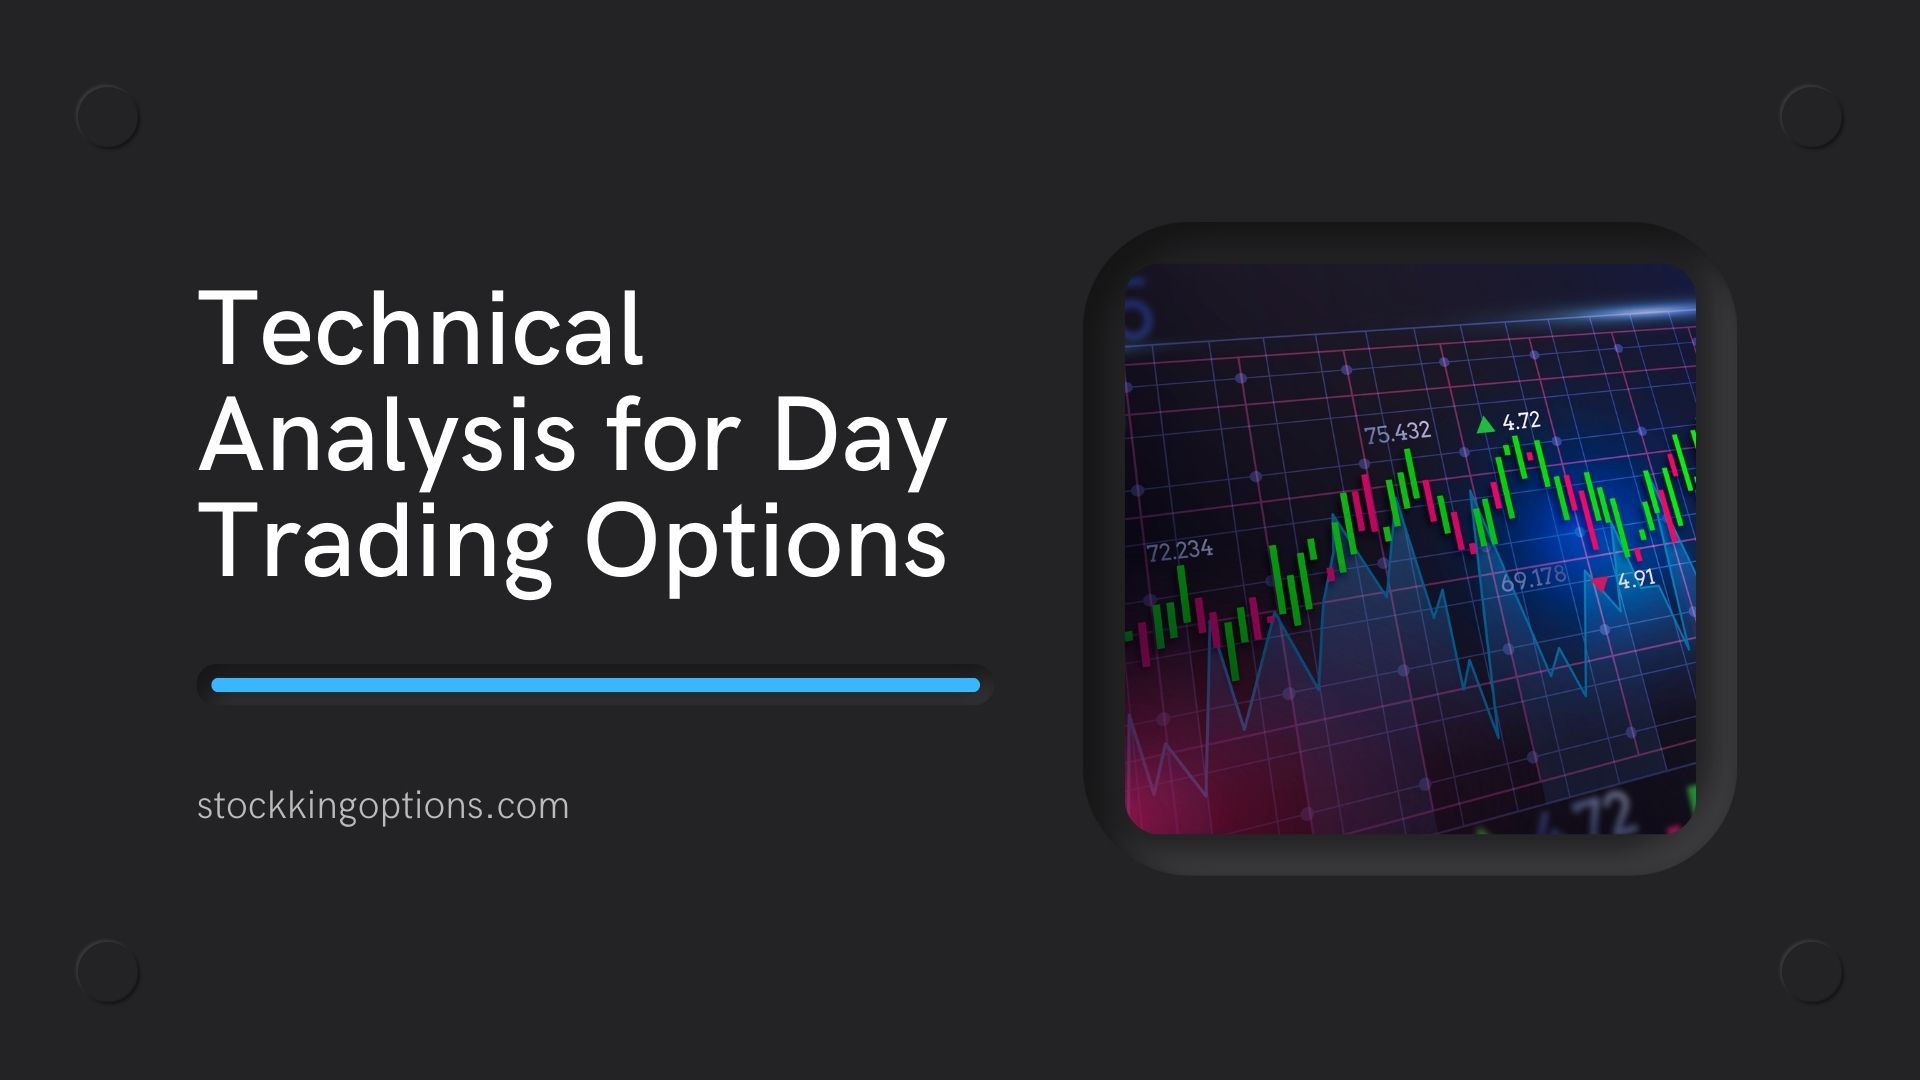 Technical Analysis for Day Trading Options